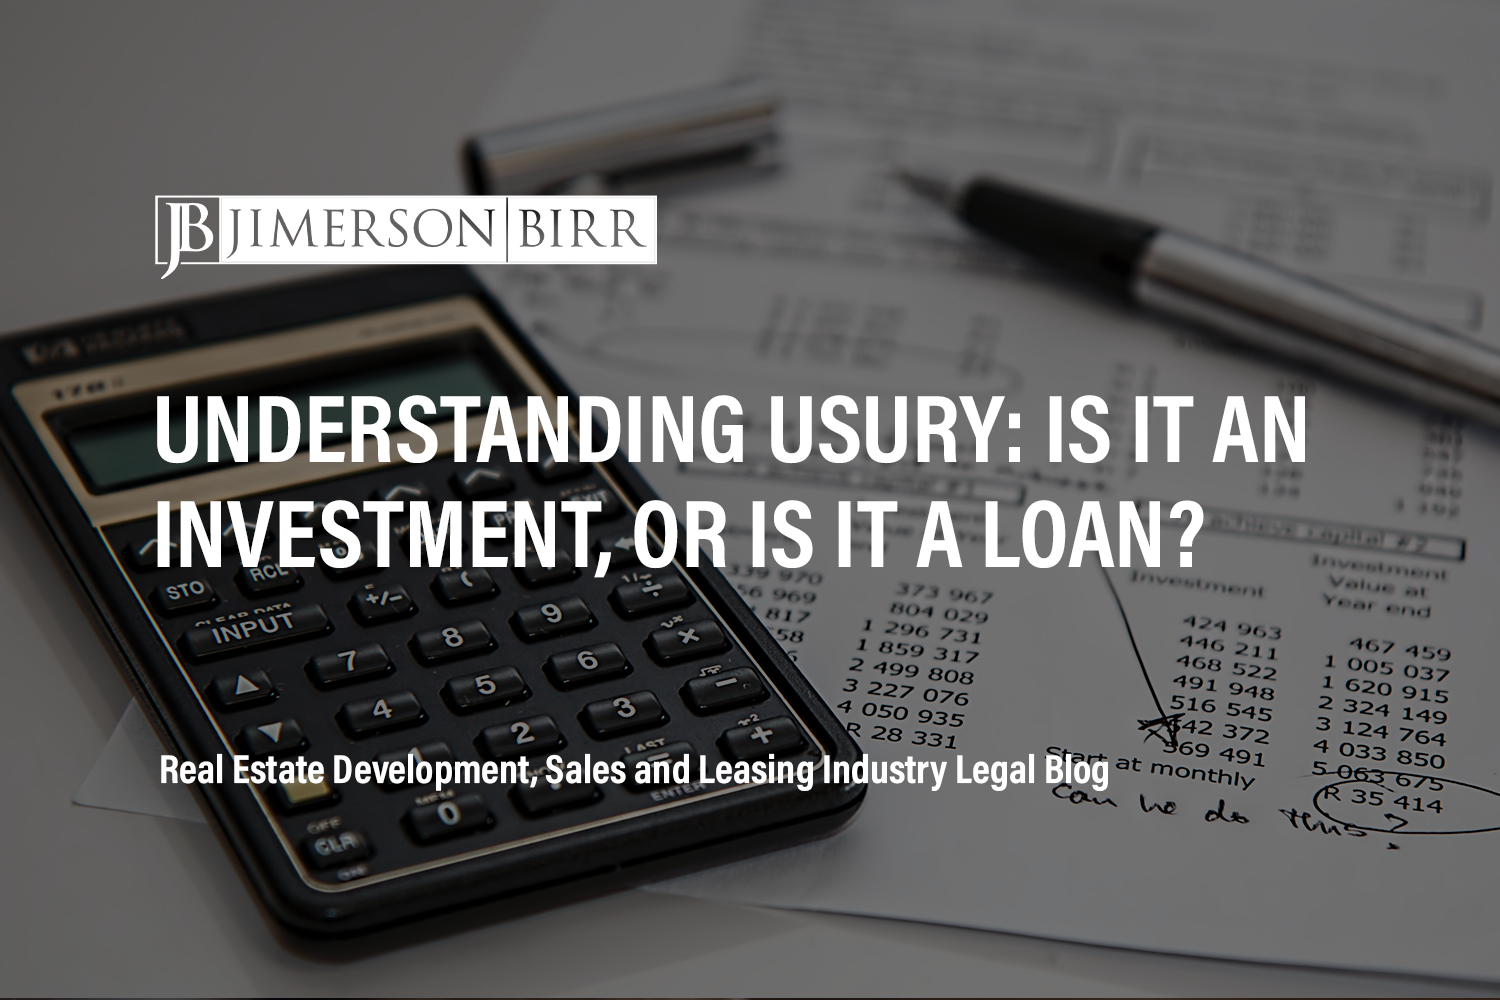 Understanding Usury: Is It an Investment, or Is It a Loan?